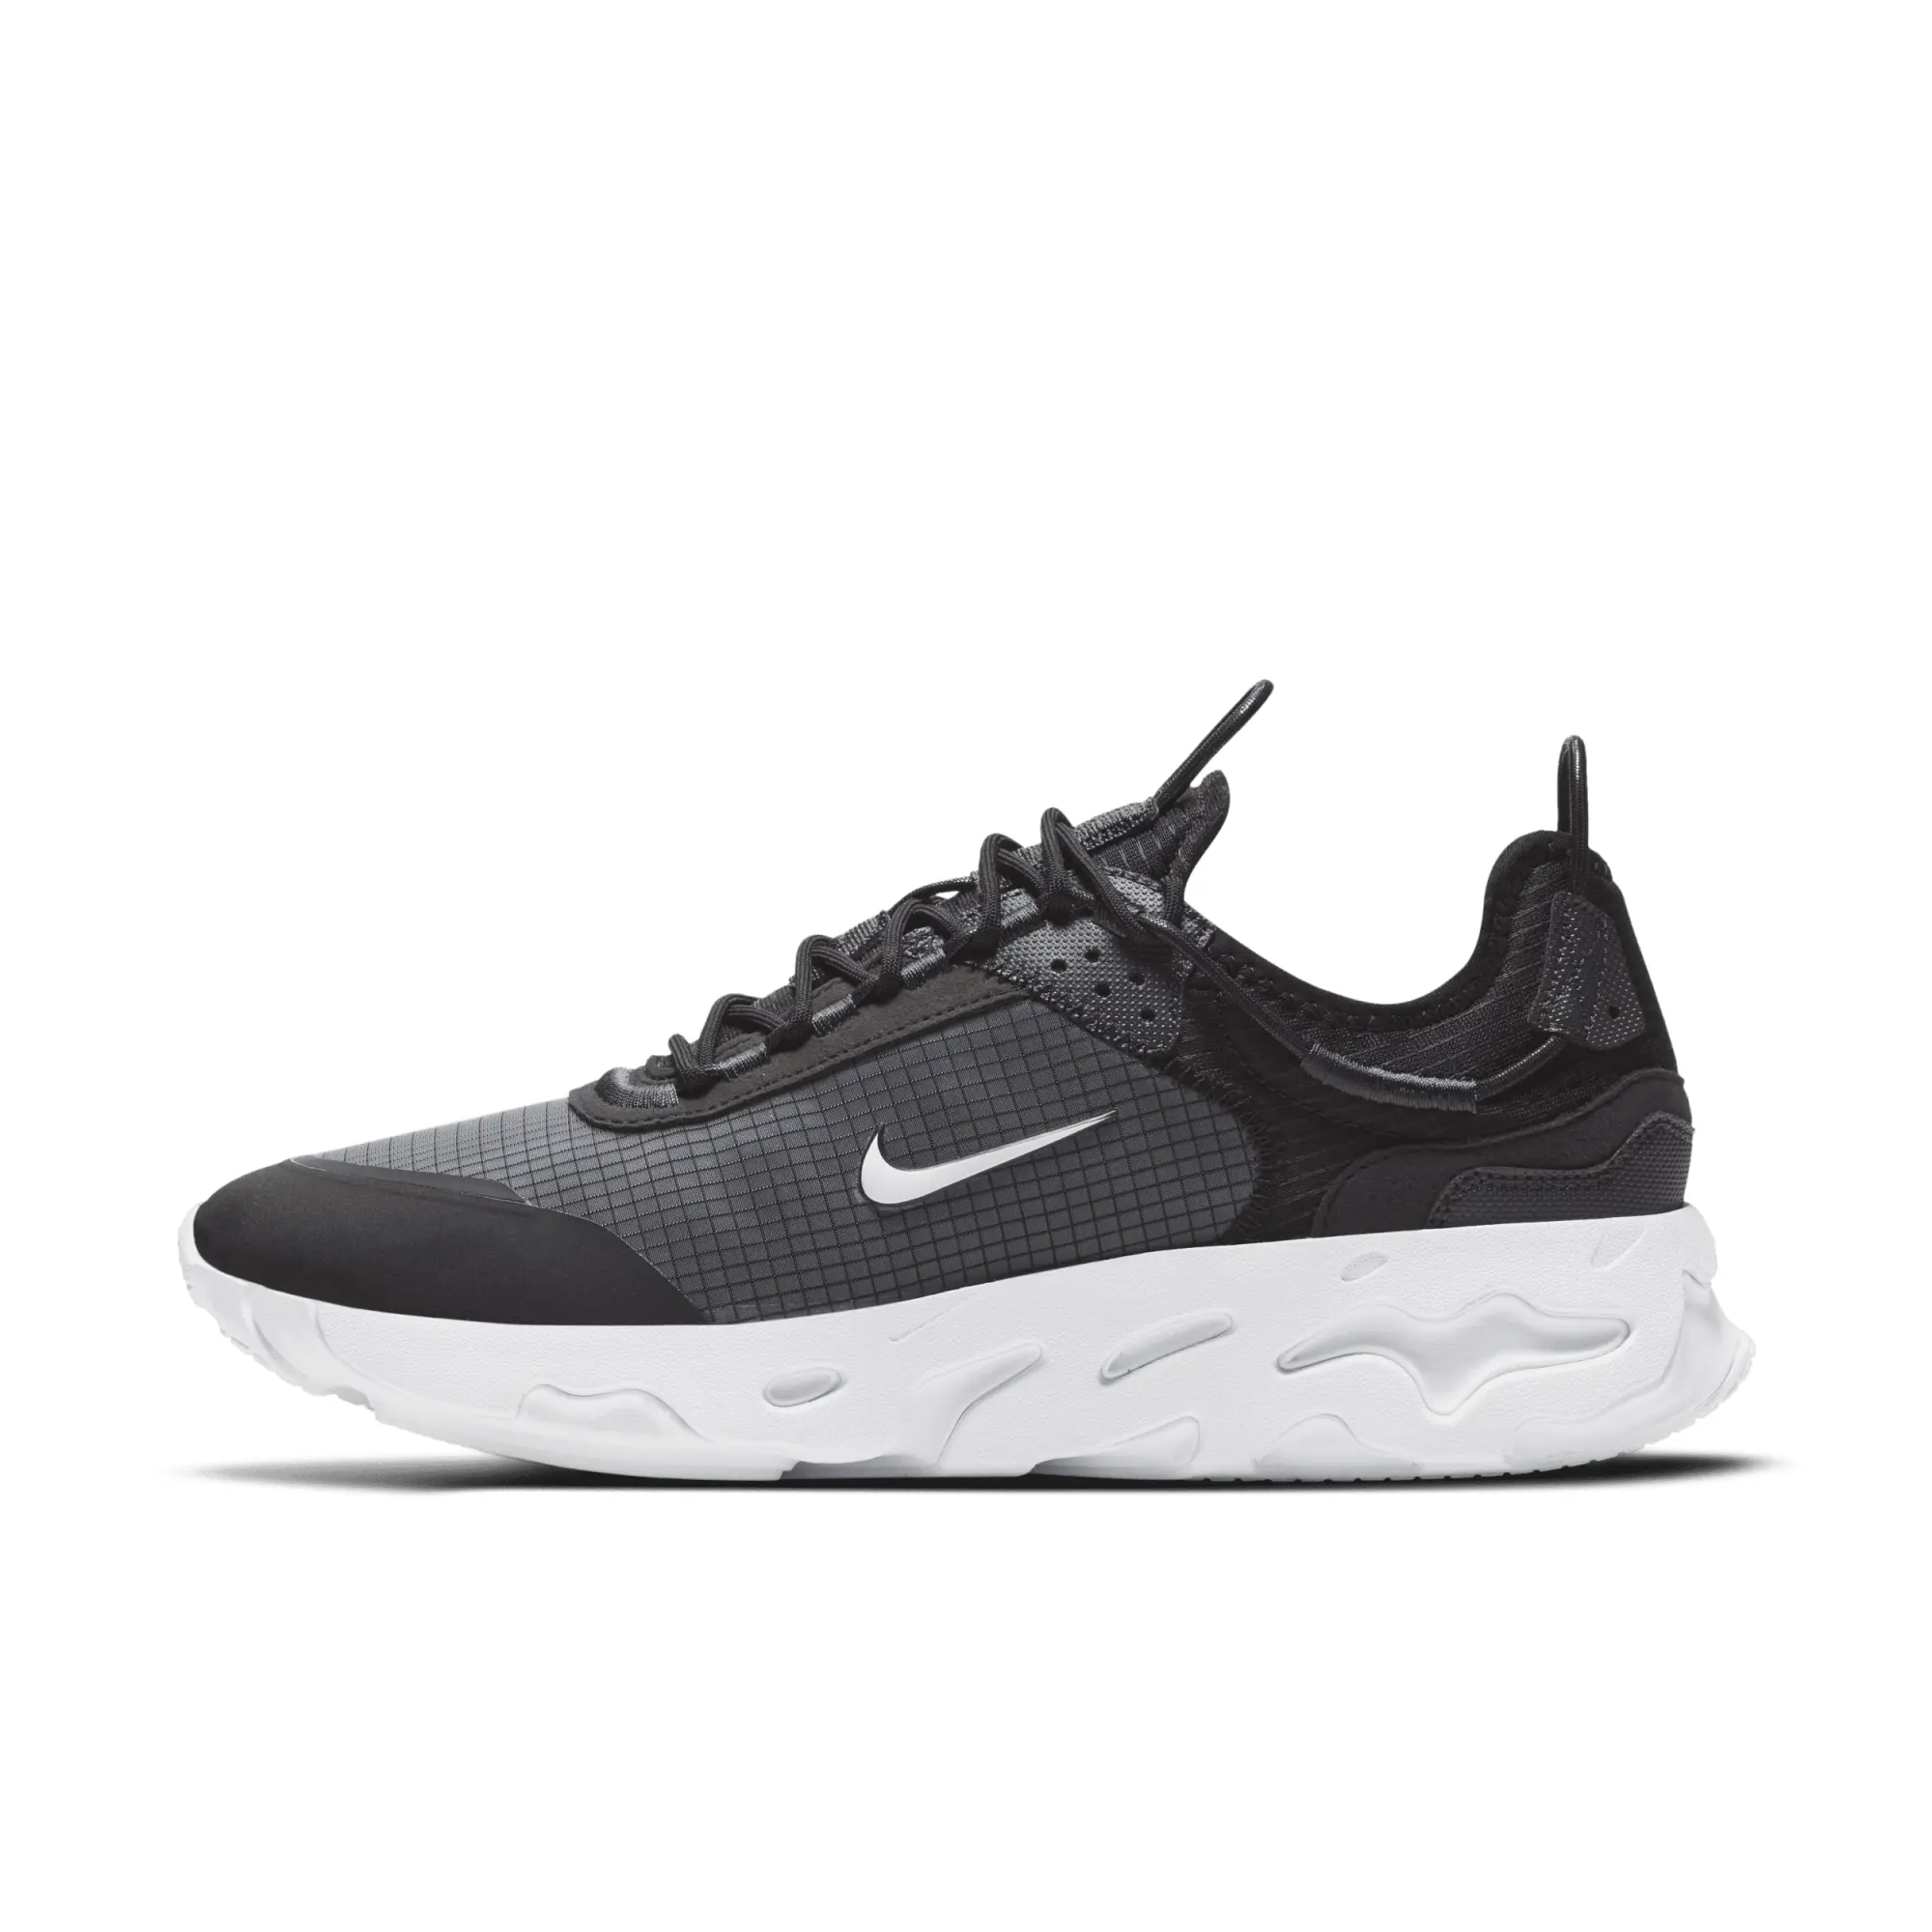 Nike React Live Trainers In Black